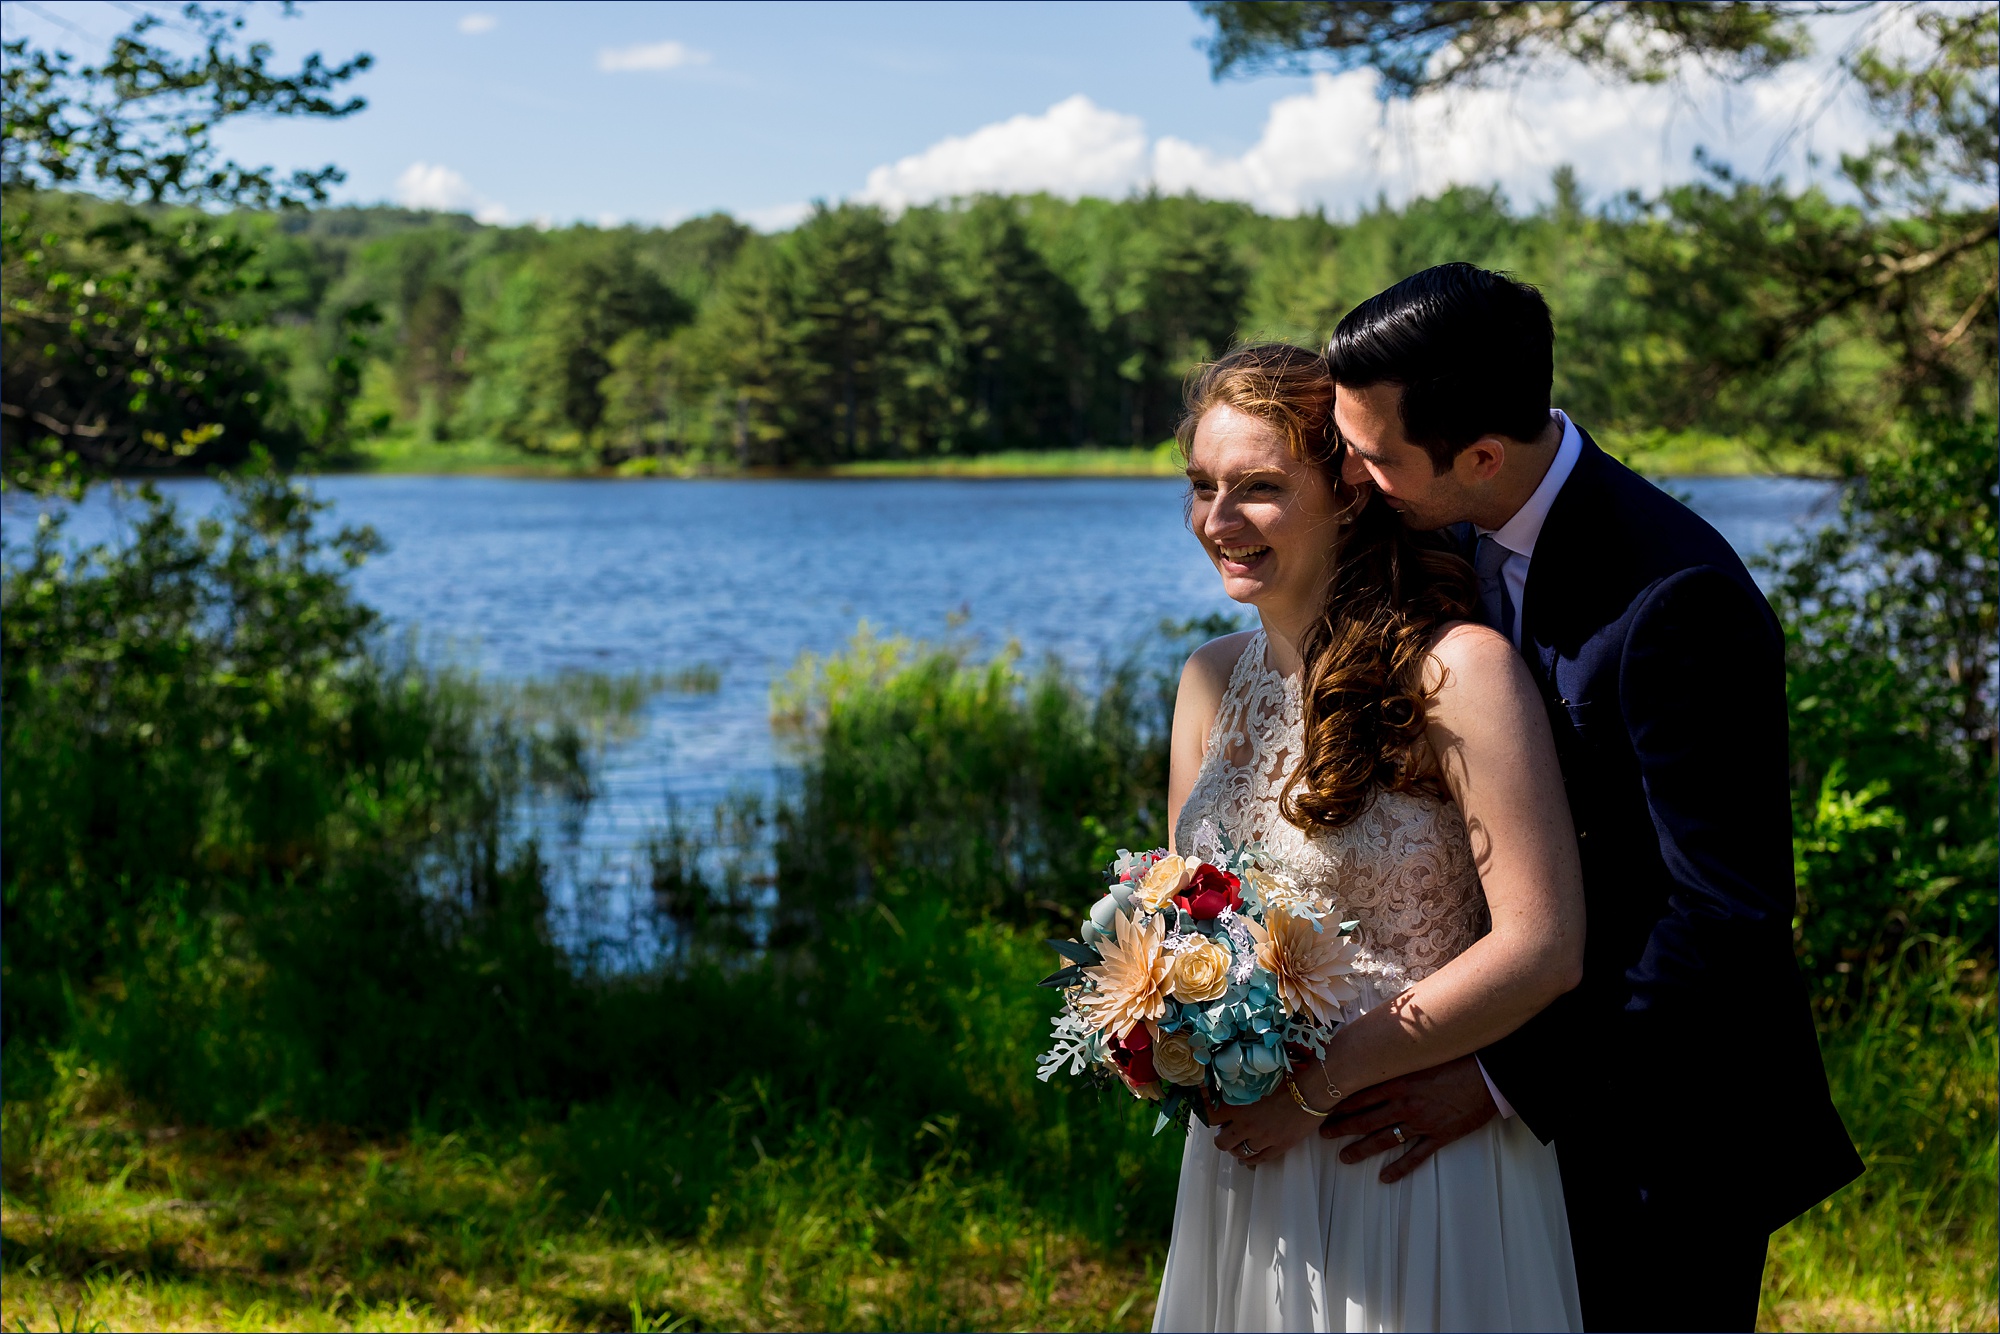 With the water as a backdrop at Kitz Farm, the couple get in close together